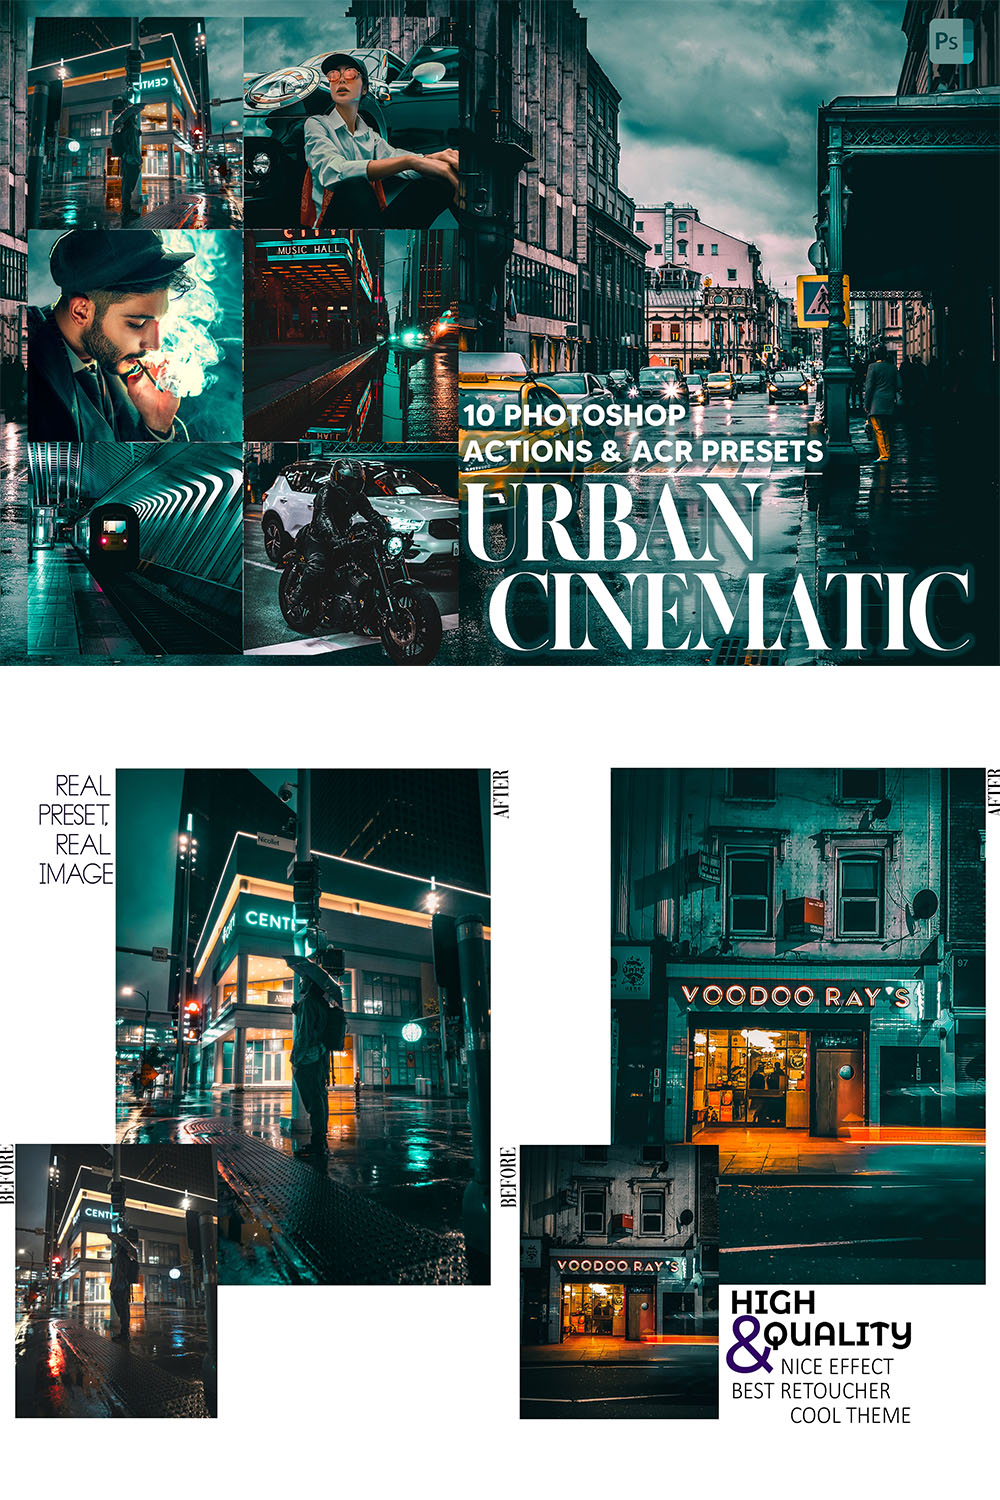 10 Photoshop Actions, Urban Cinematic Ps Action, Moody Film ACR Preset, City Cinema Ps Filter Atn Portrait Lifestyle Theme Instagram Blogger pinterest preview image.